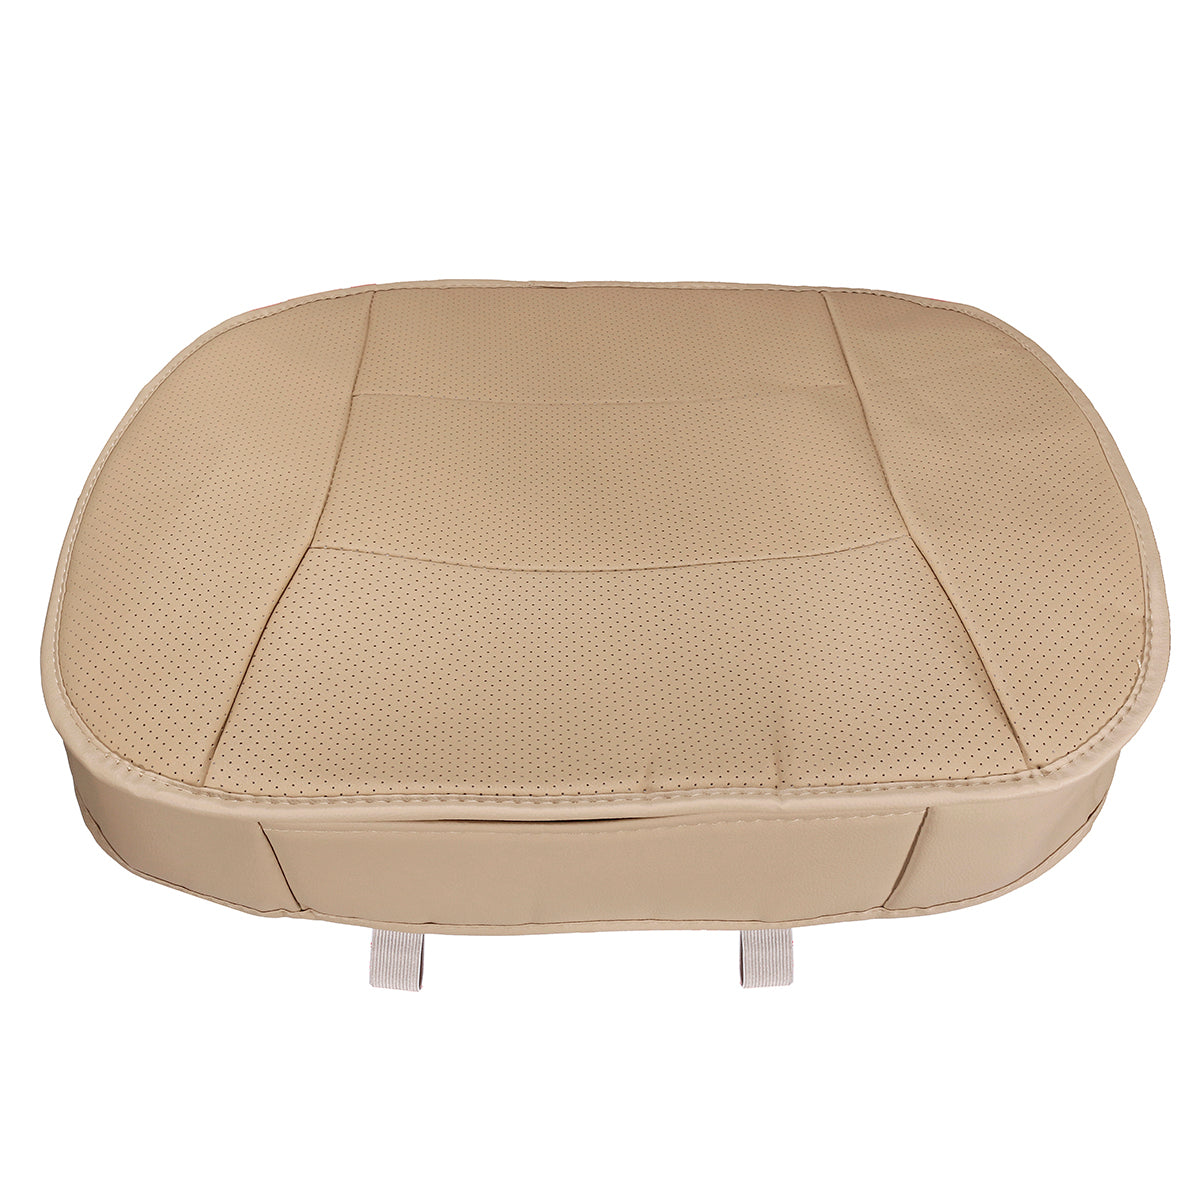 Single leather Universal Car Seat Cover Cushion without Backrest - Auto GoShop